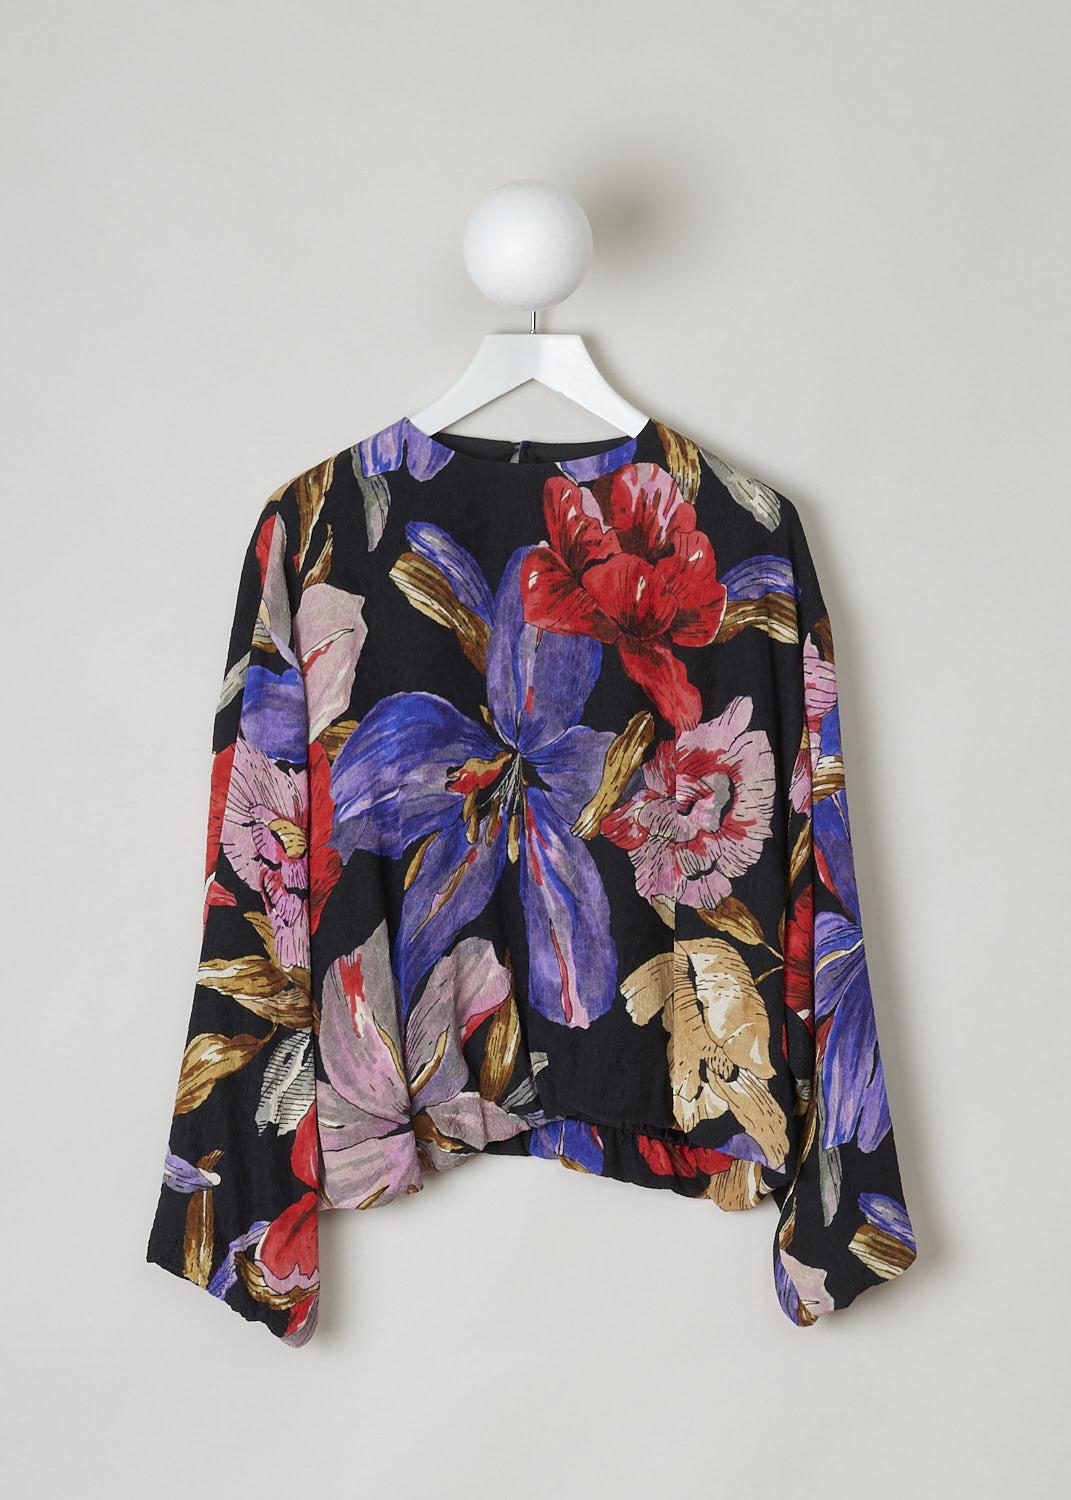 DRIES VAN NOTEN, TOP WITH MULTICOLOR FLORAL PRINT, CAPO_6159_WW_SHIRT_BLACK, Black, Purple, Print, Front, This top has a black base color with a multicolored floral print. The top has a high, round neckline with a keyhole button closure in the back. The long sleeves have elasticated cuffs. The top has a cropped length with an elasticated hemline. 
